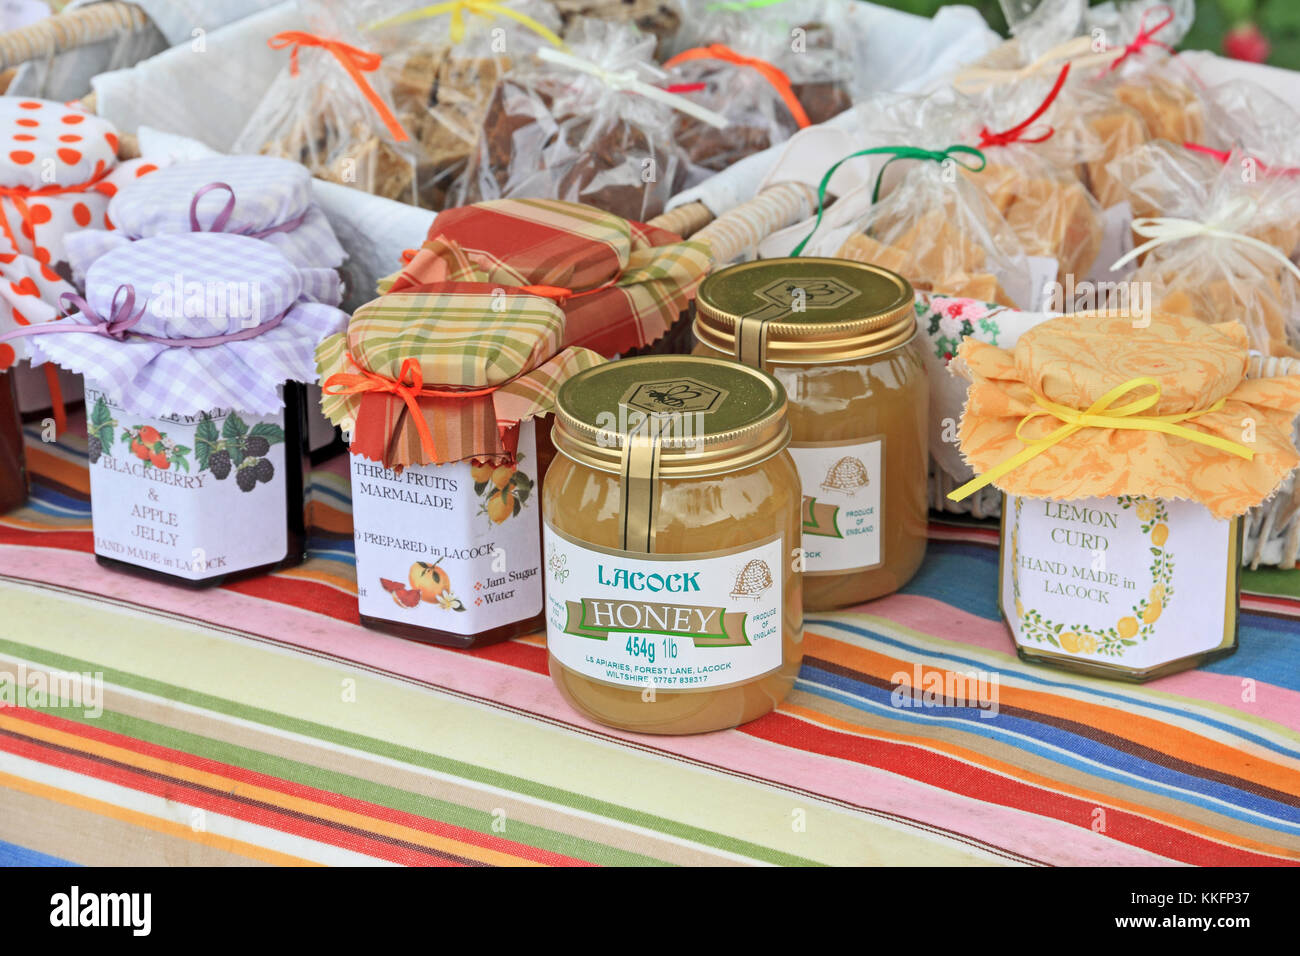 Local produce for sale on stall, Lacock, Wiltshire Stock Photo